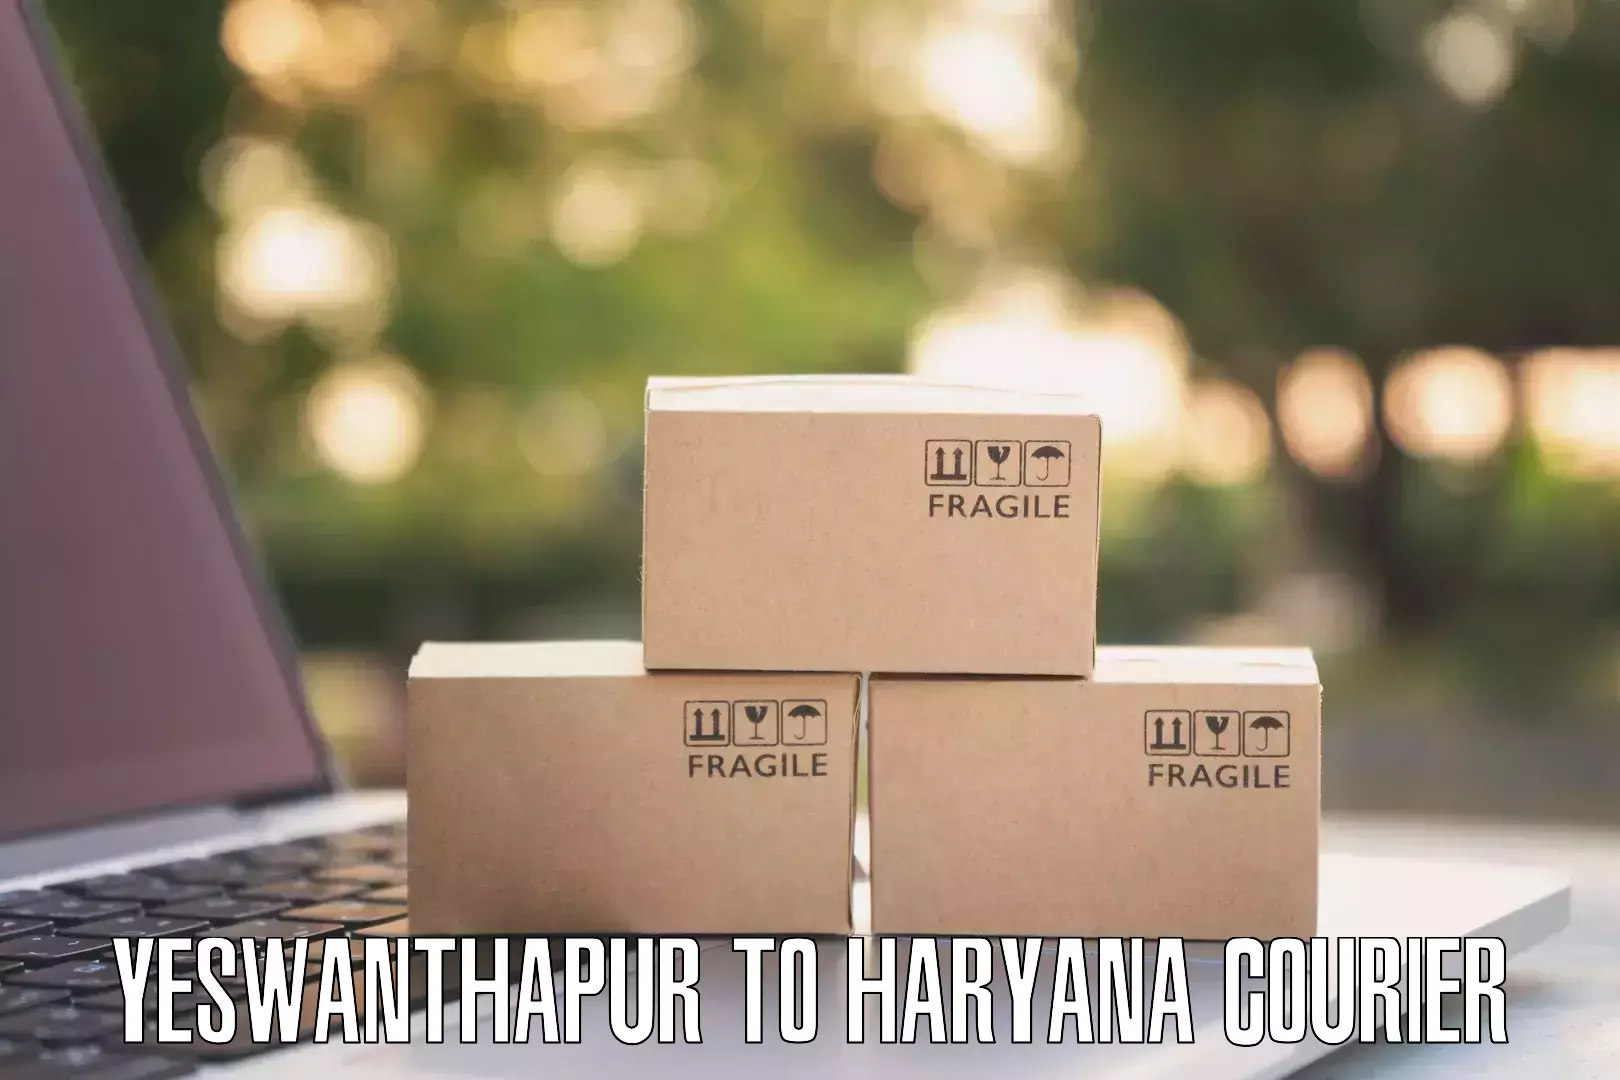 Quick dispatch service Yeswanthapur to Haryana